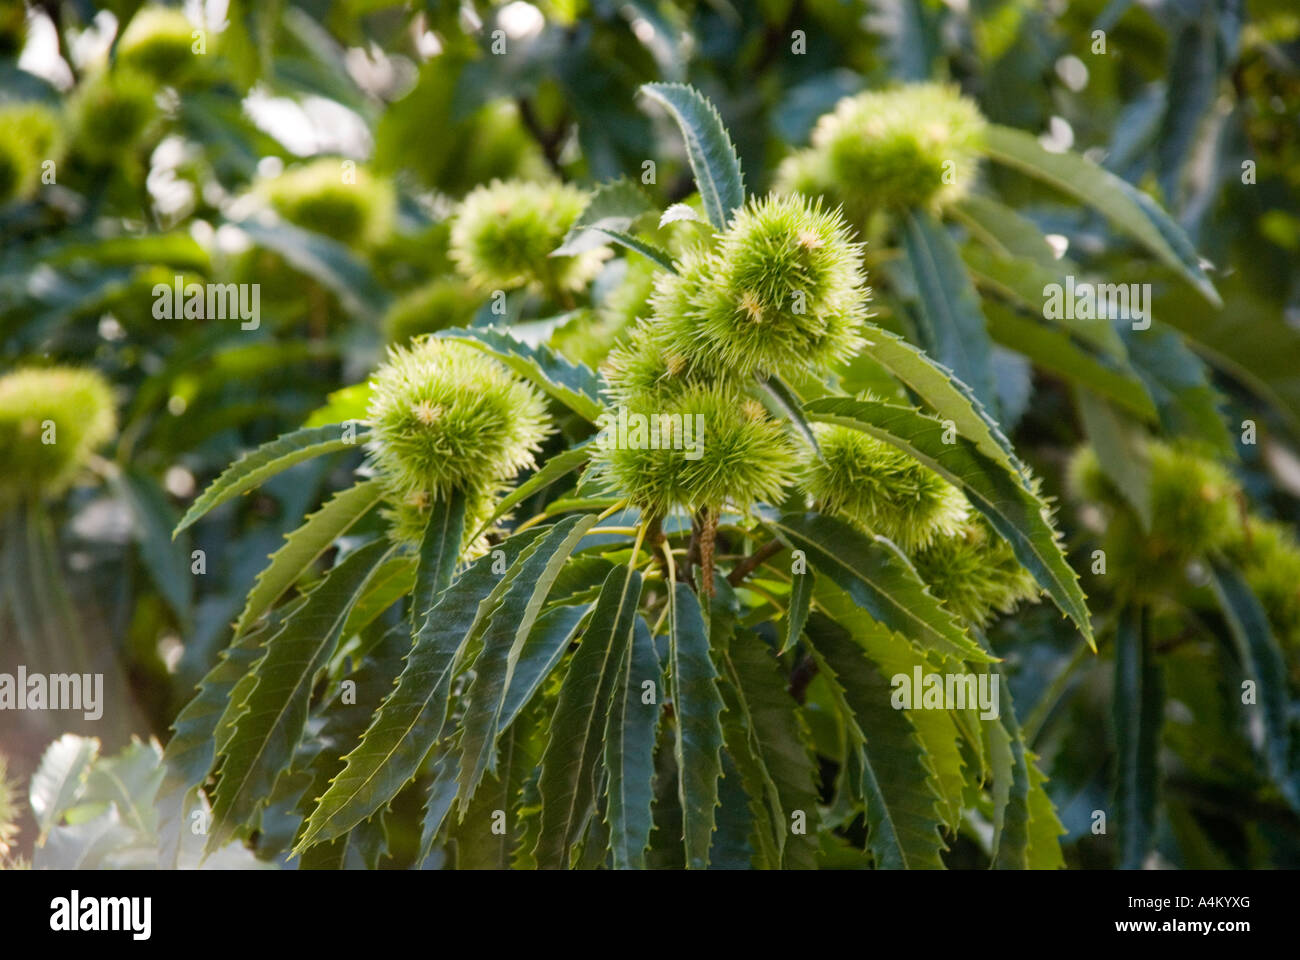 Chestnuts ripening on a tree Stock Photo